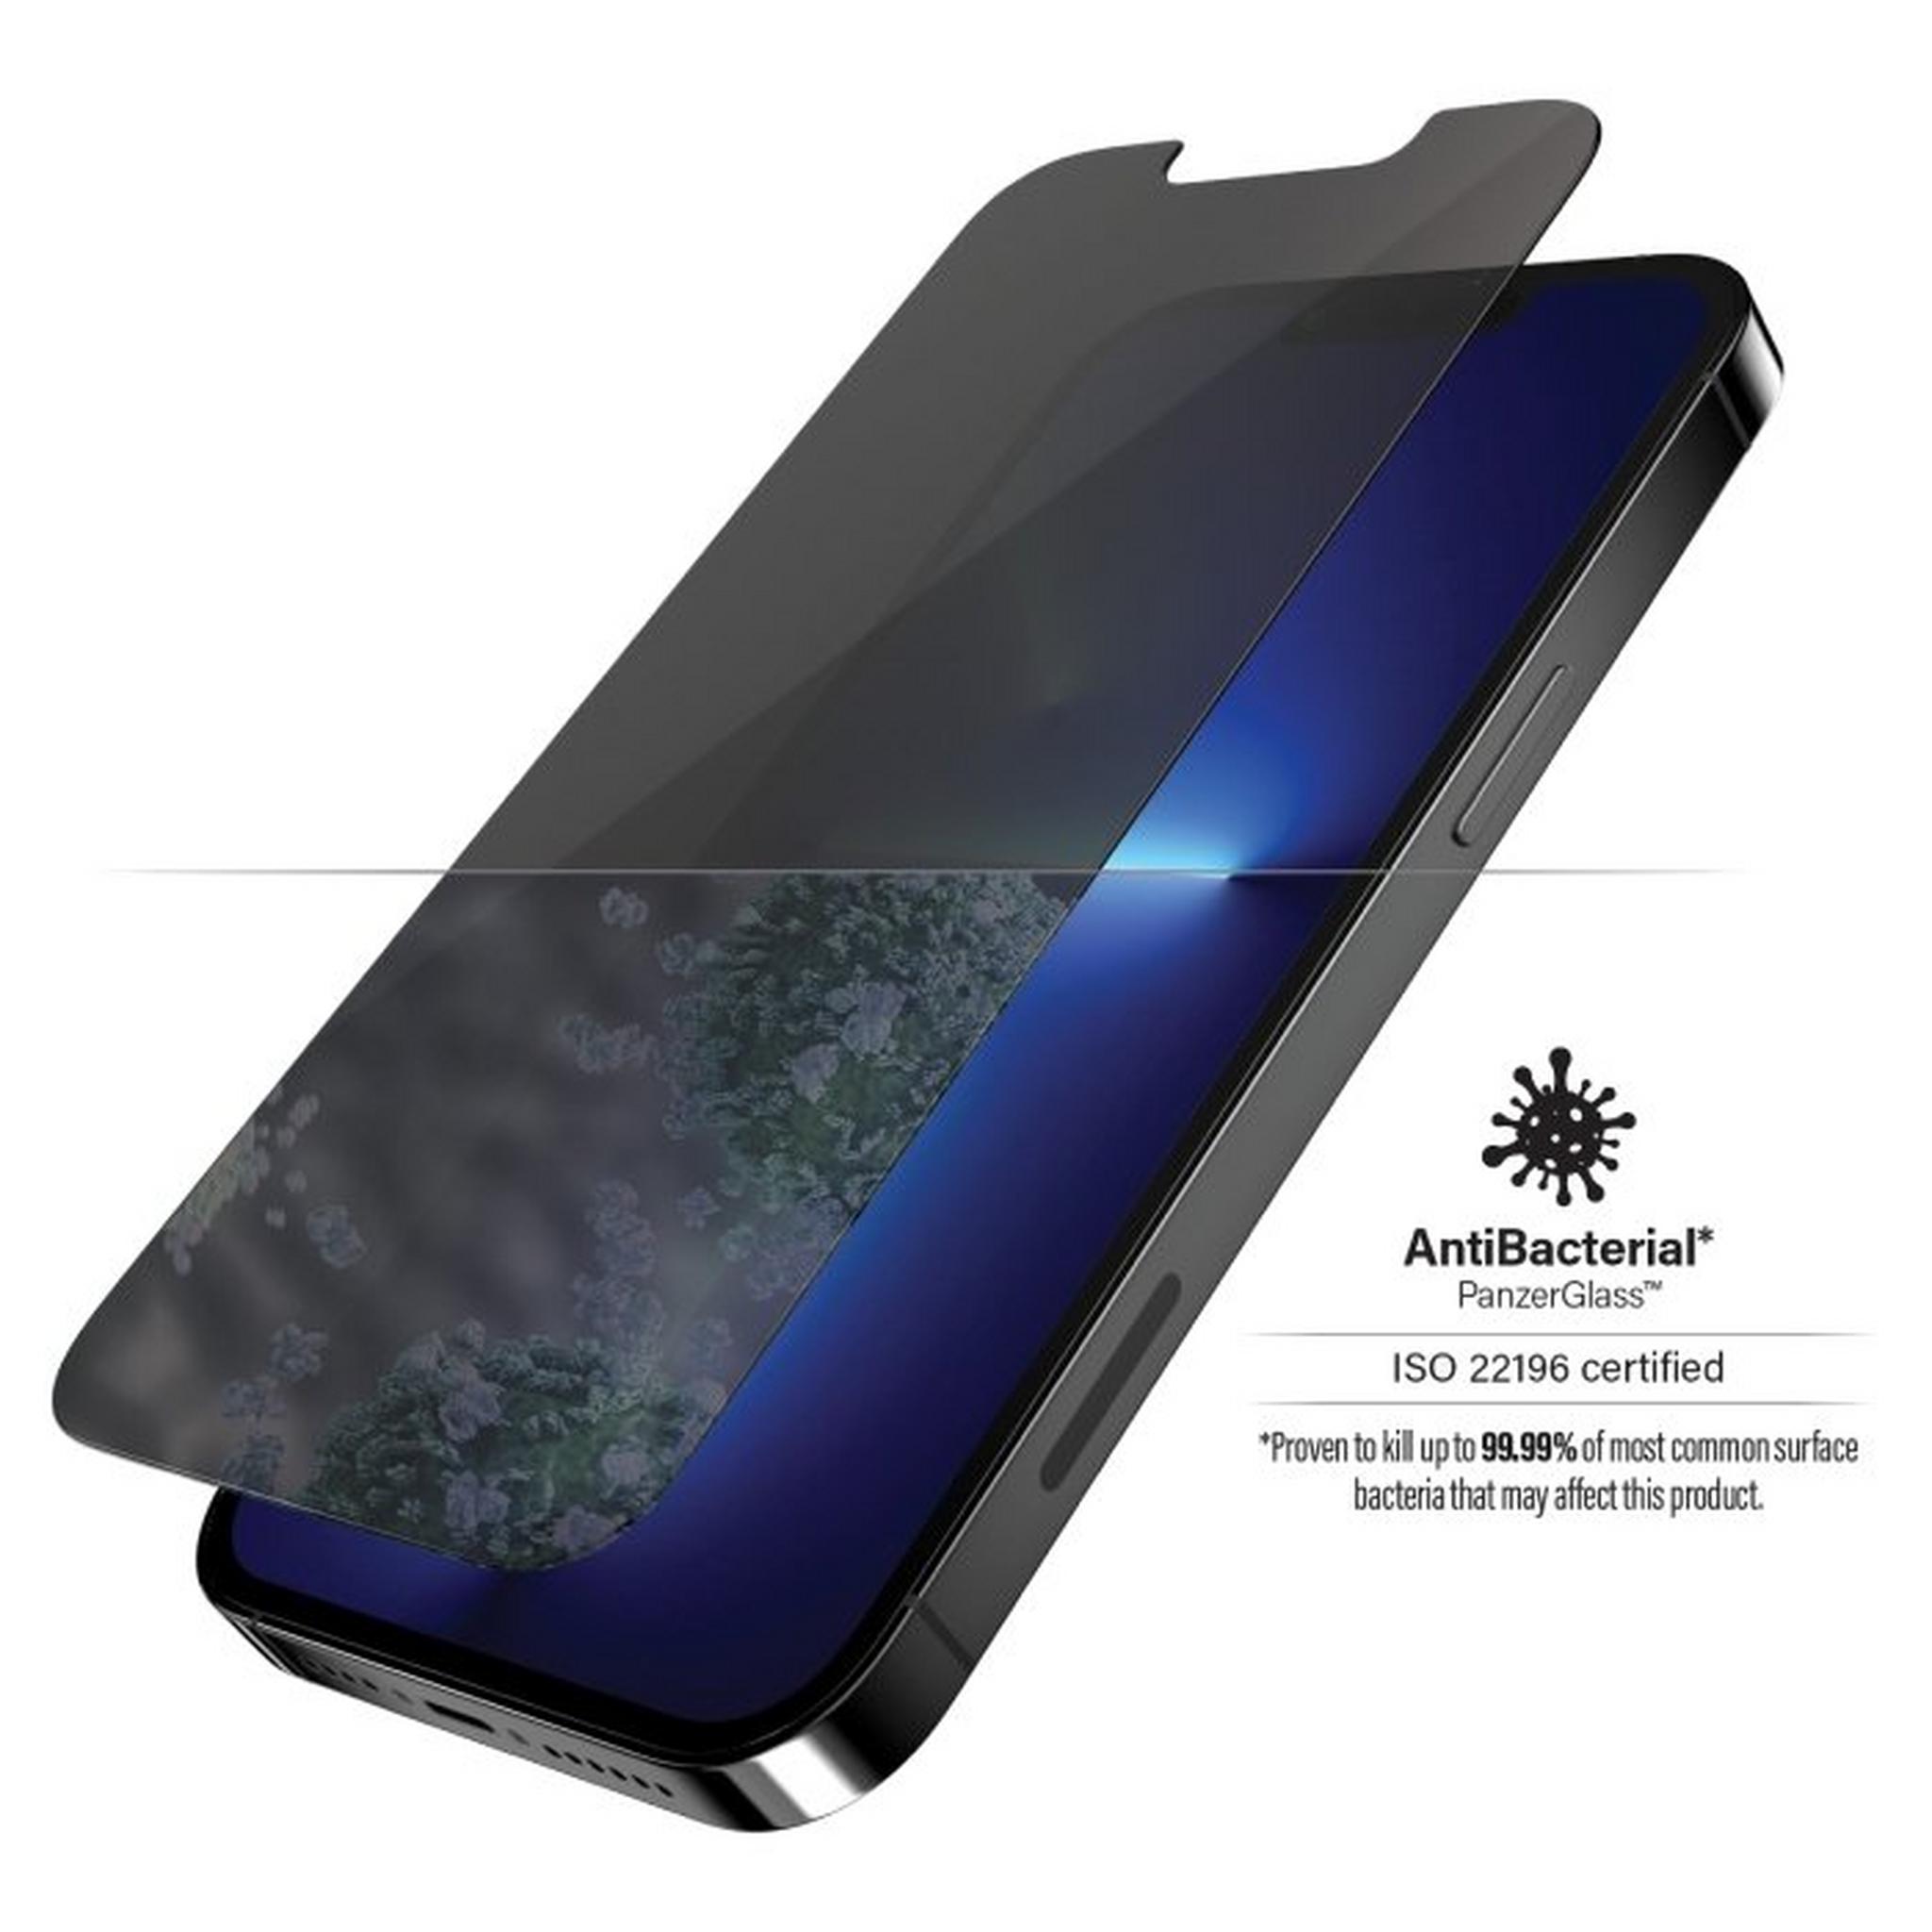 Panzer iPhone 13 Pro Max Standard Glass Screen Protector - Privacy